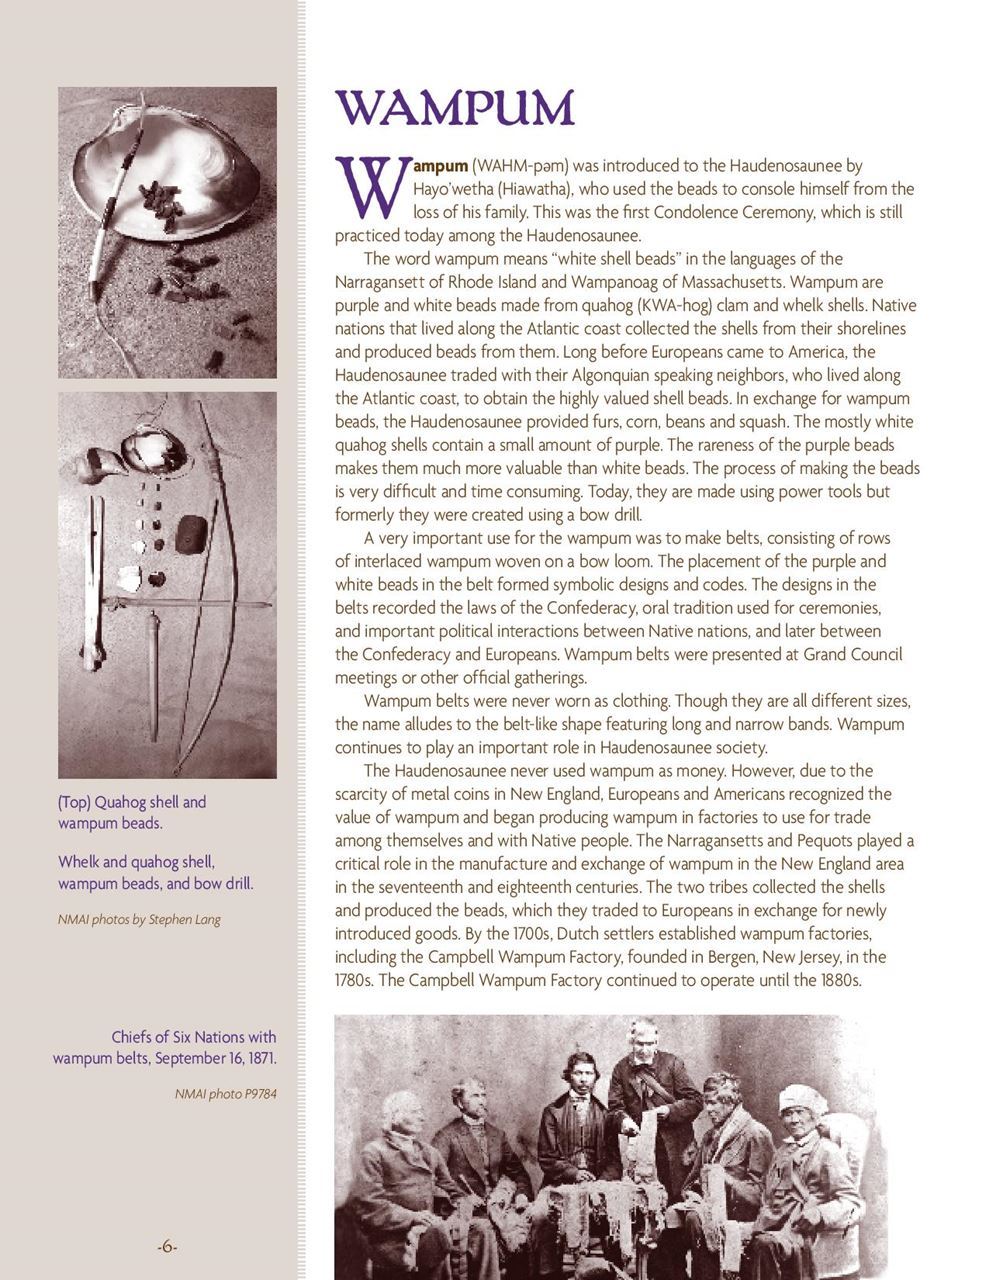 Link/image to informational text about wampum